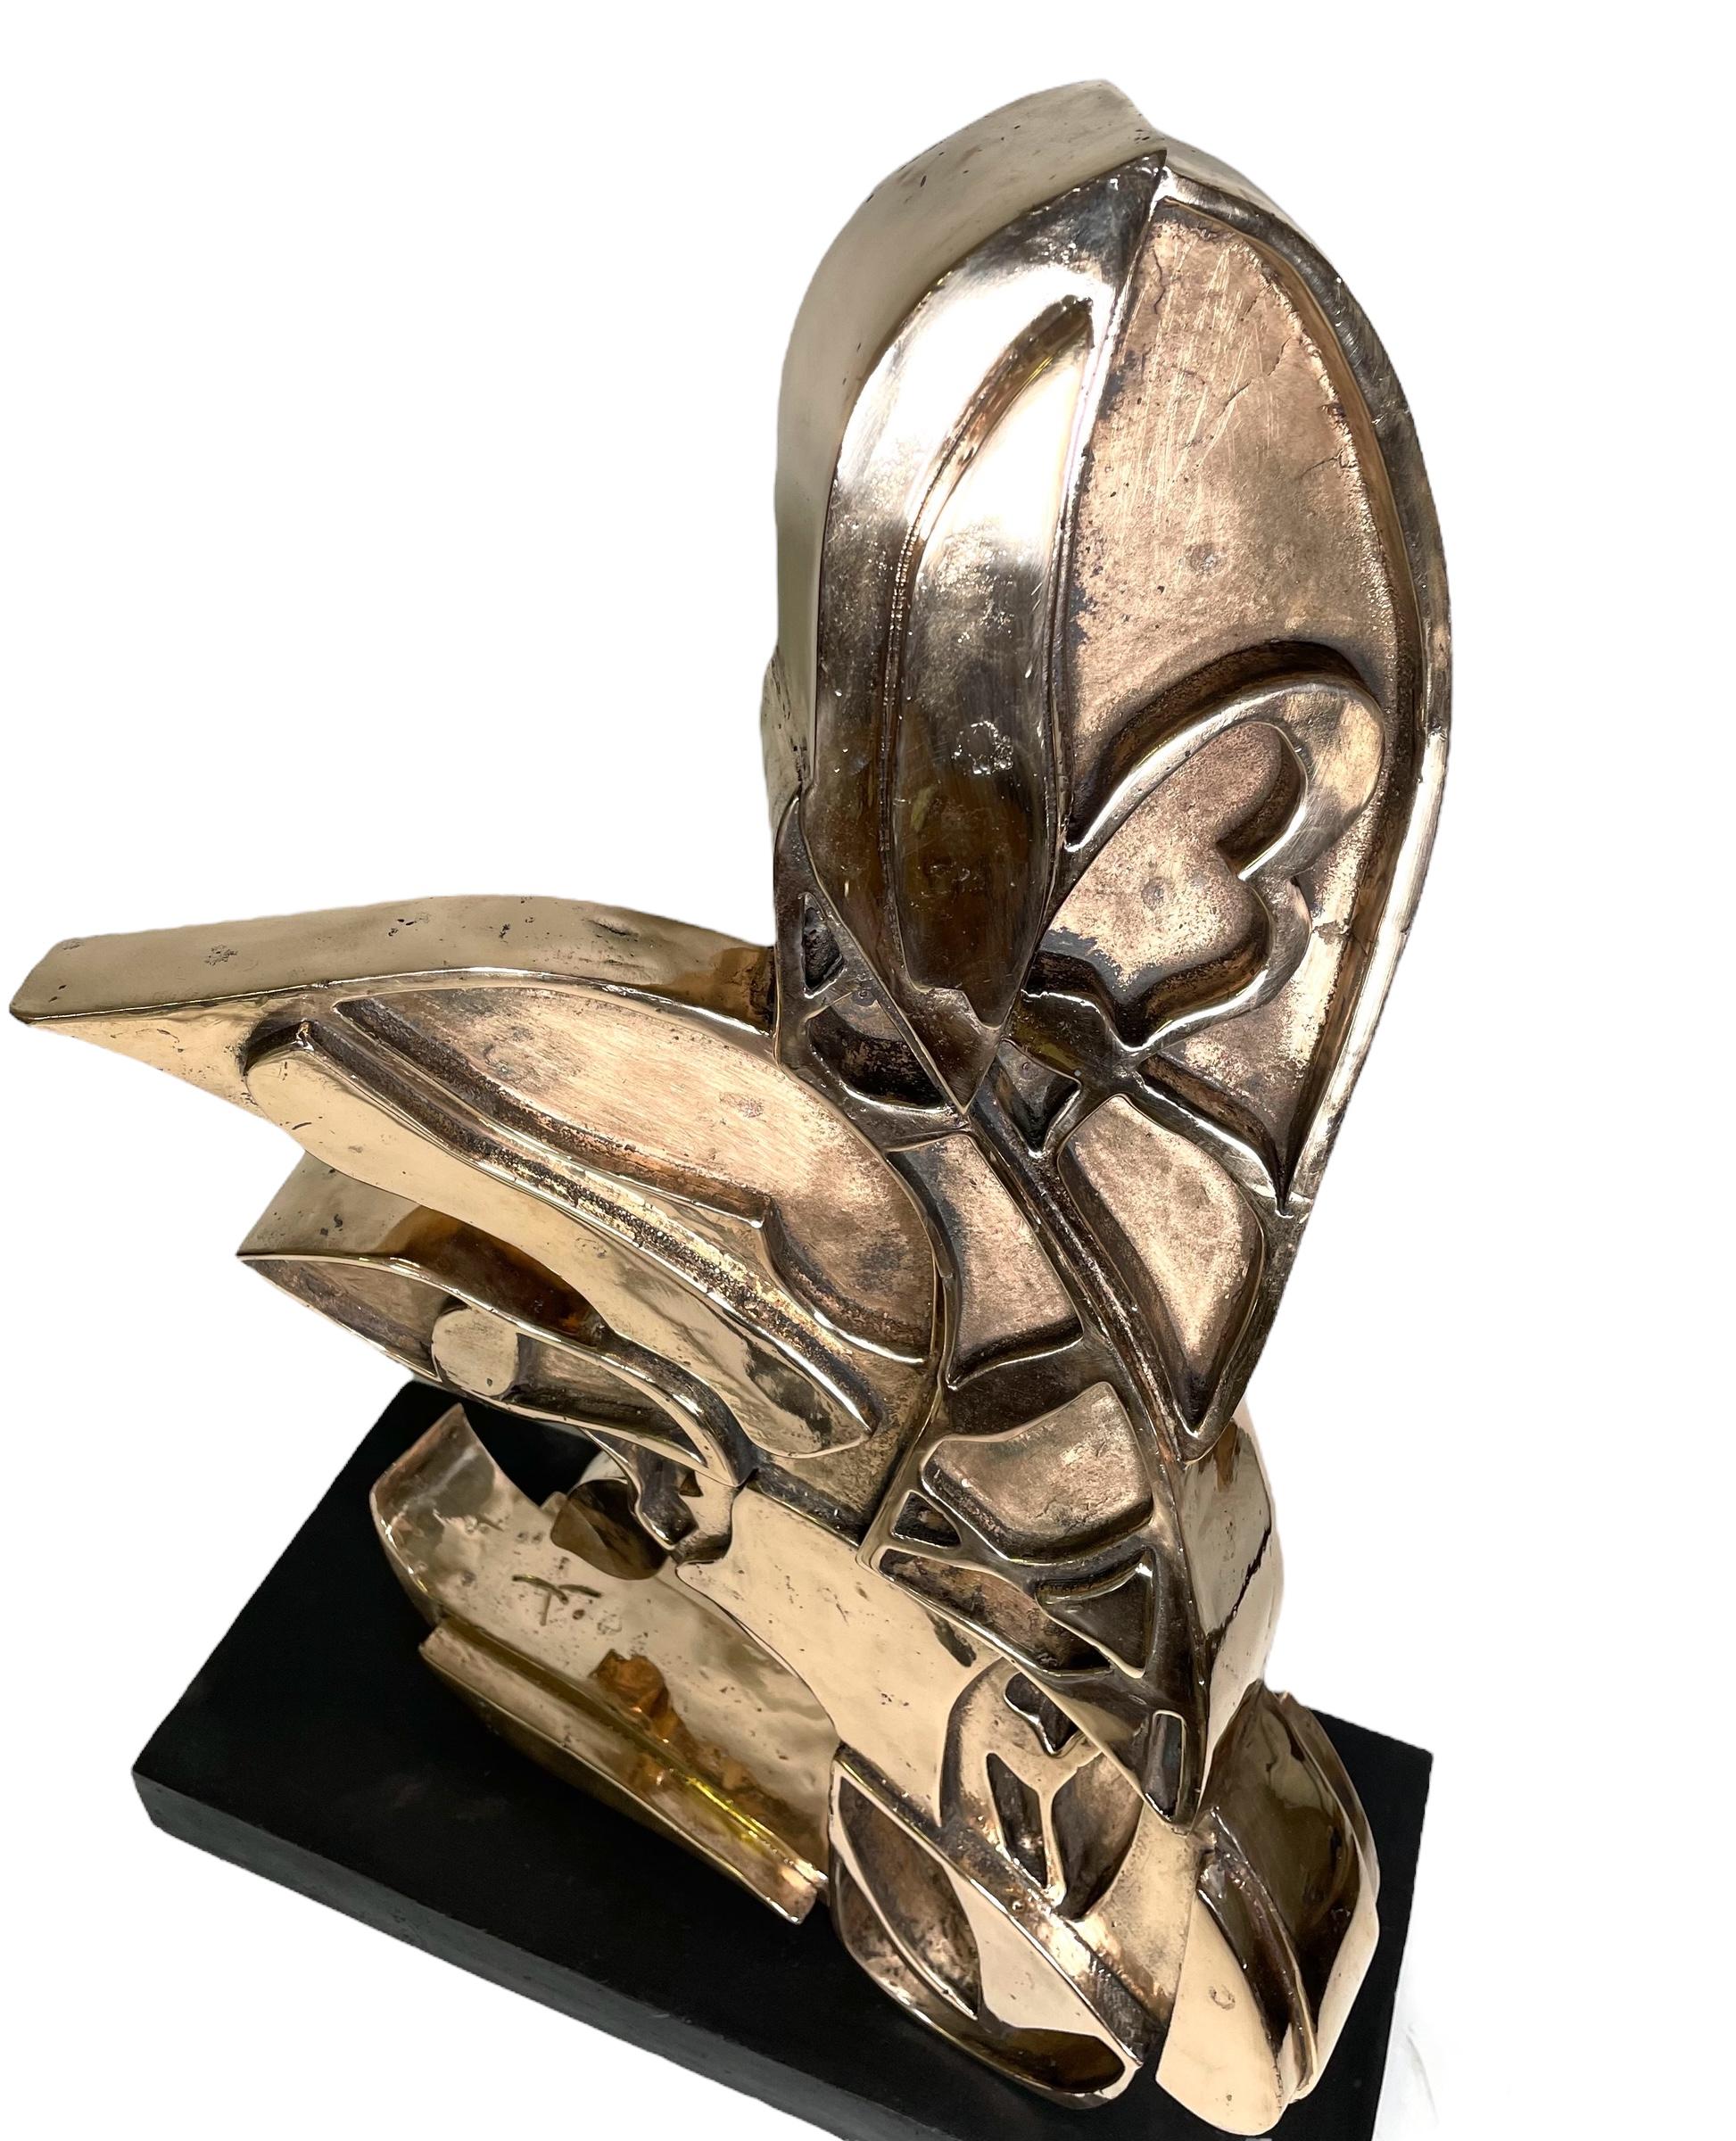 Numbered and limited to 12 copies ( 8 + 4 )
Artwork signed
Authenticity: Sold with certificate of Authenticity from the gallery
Invoice from the gallery
Sculpture: bronze, metal, bronze patina

Display: The sculpture can't be displayed outdoors